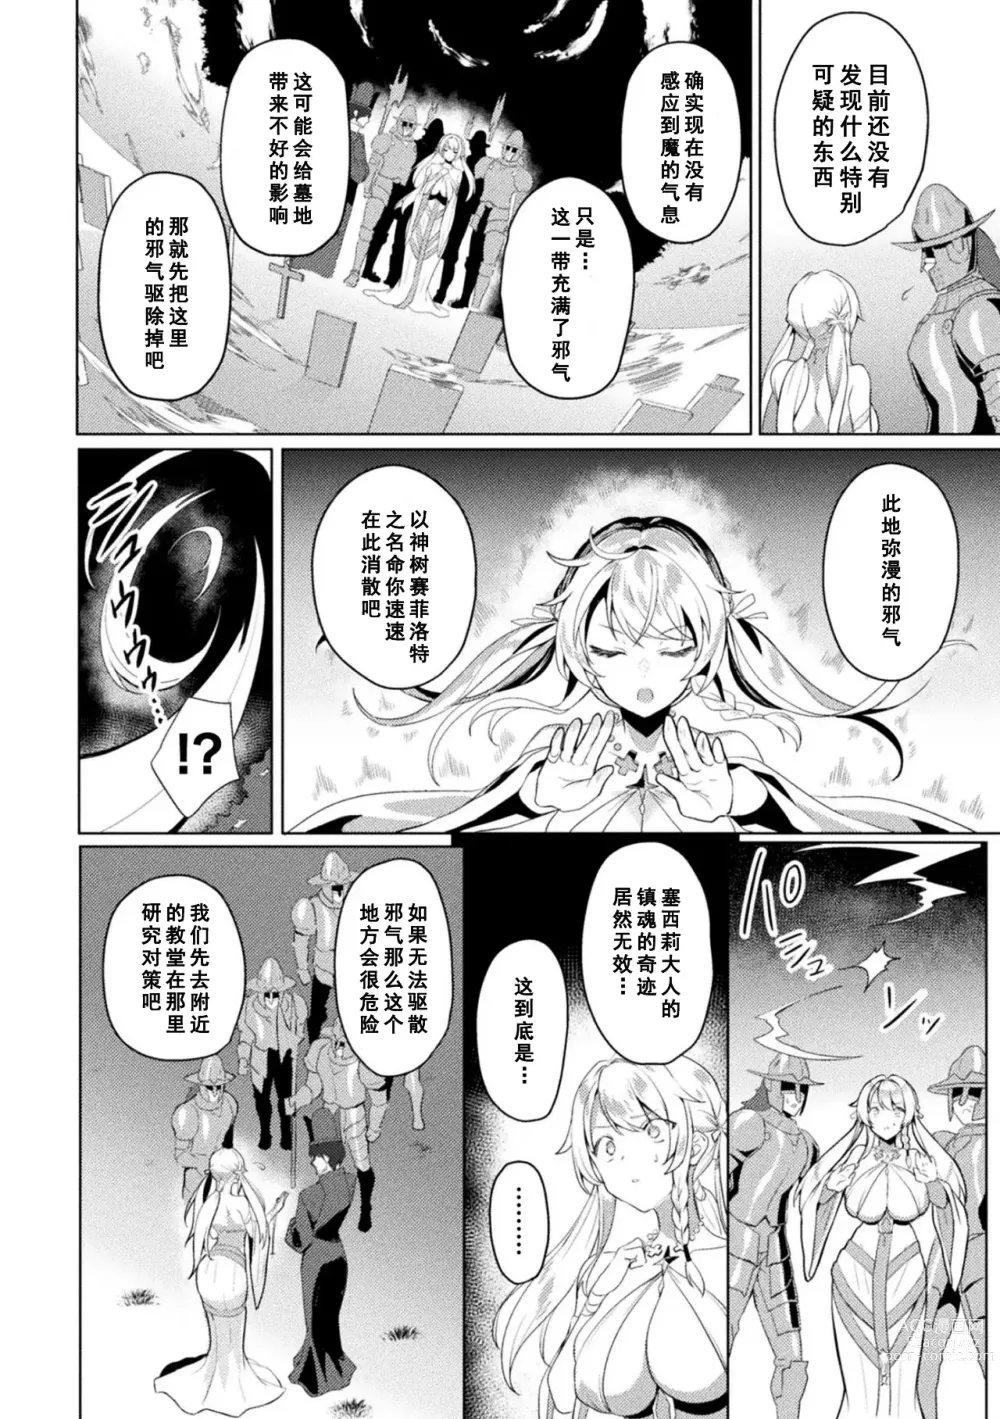 Page 8 of manga Edens Ritter Ch. 1 Gaiden - Innan no Mikohime Cecily Hen THE COMIC Ch. 1